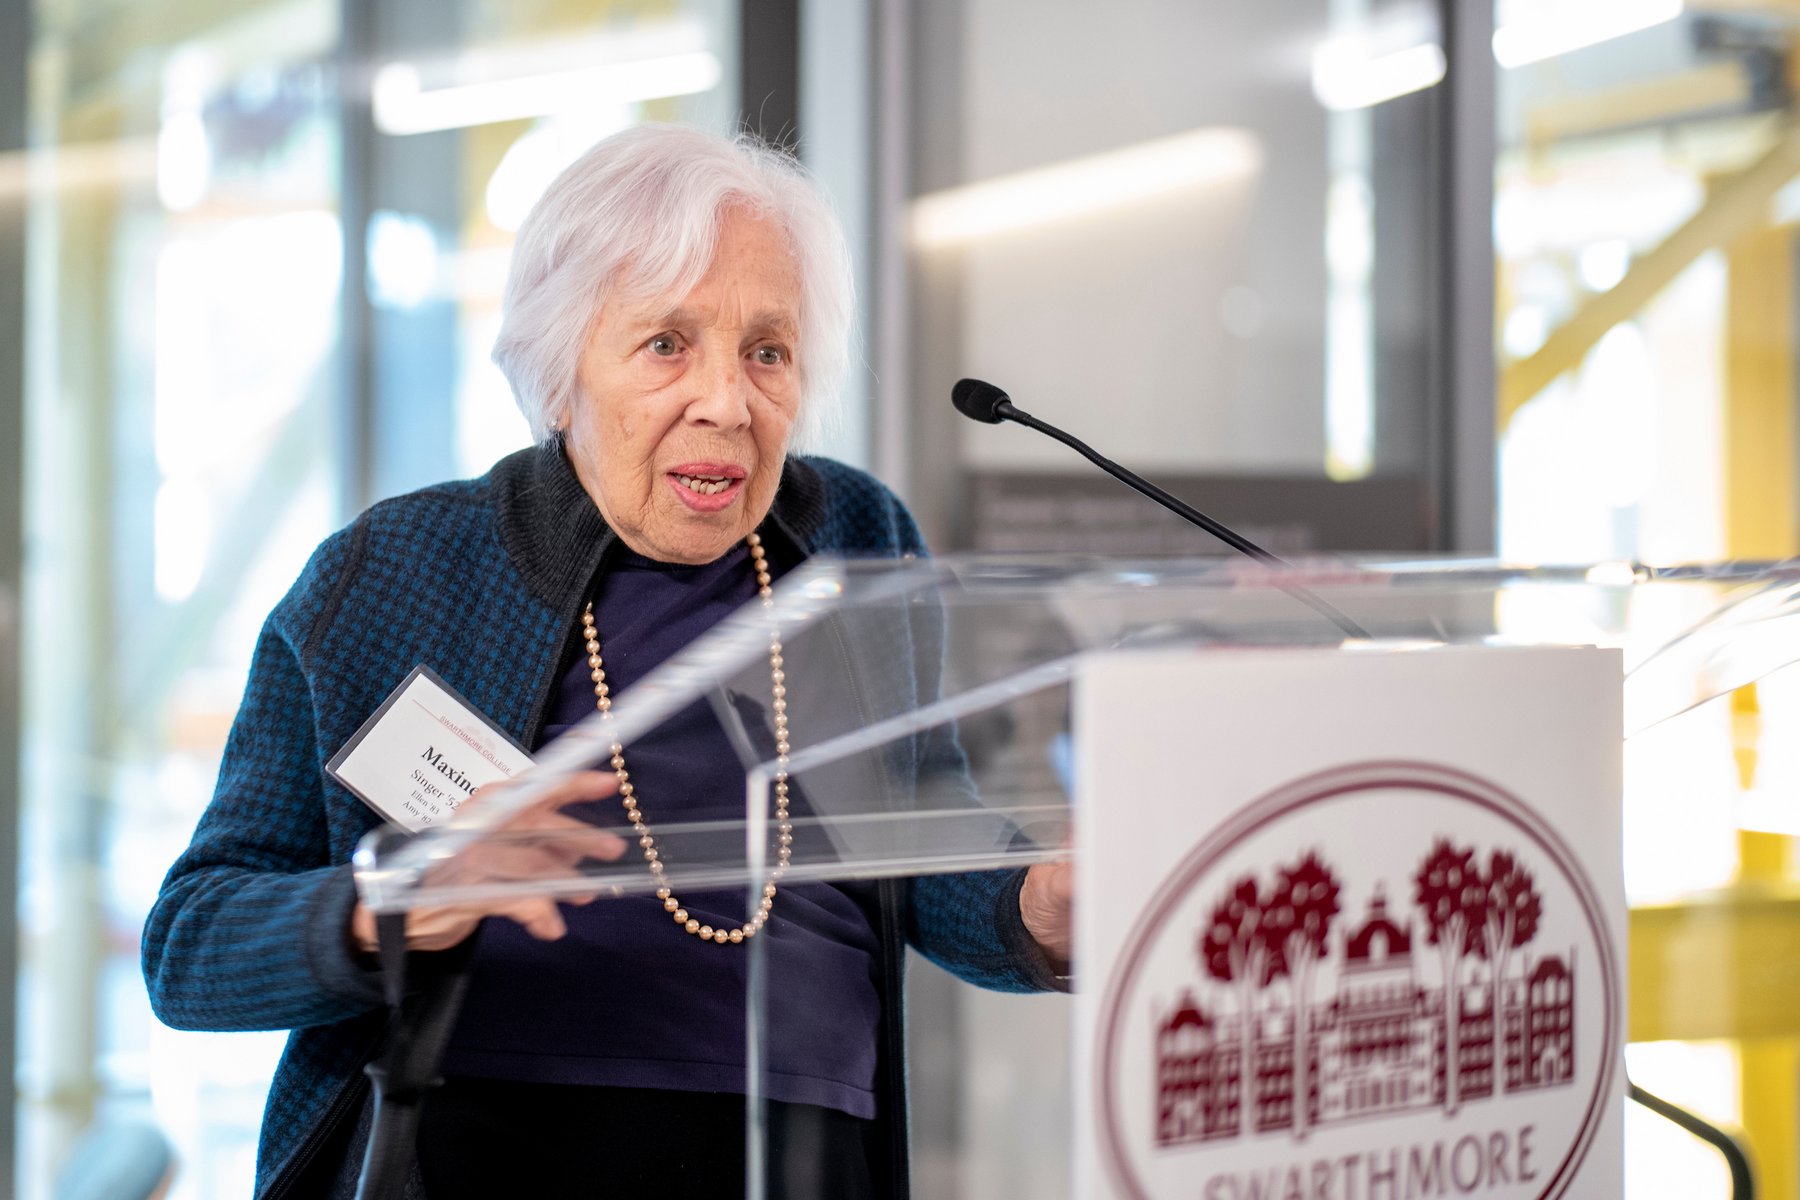 Maxine Frank Singer on the podium during the inauguration of her eponymous building